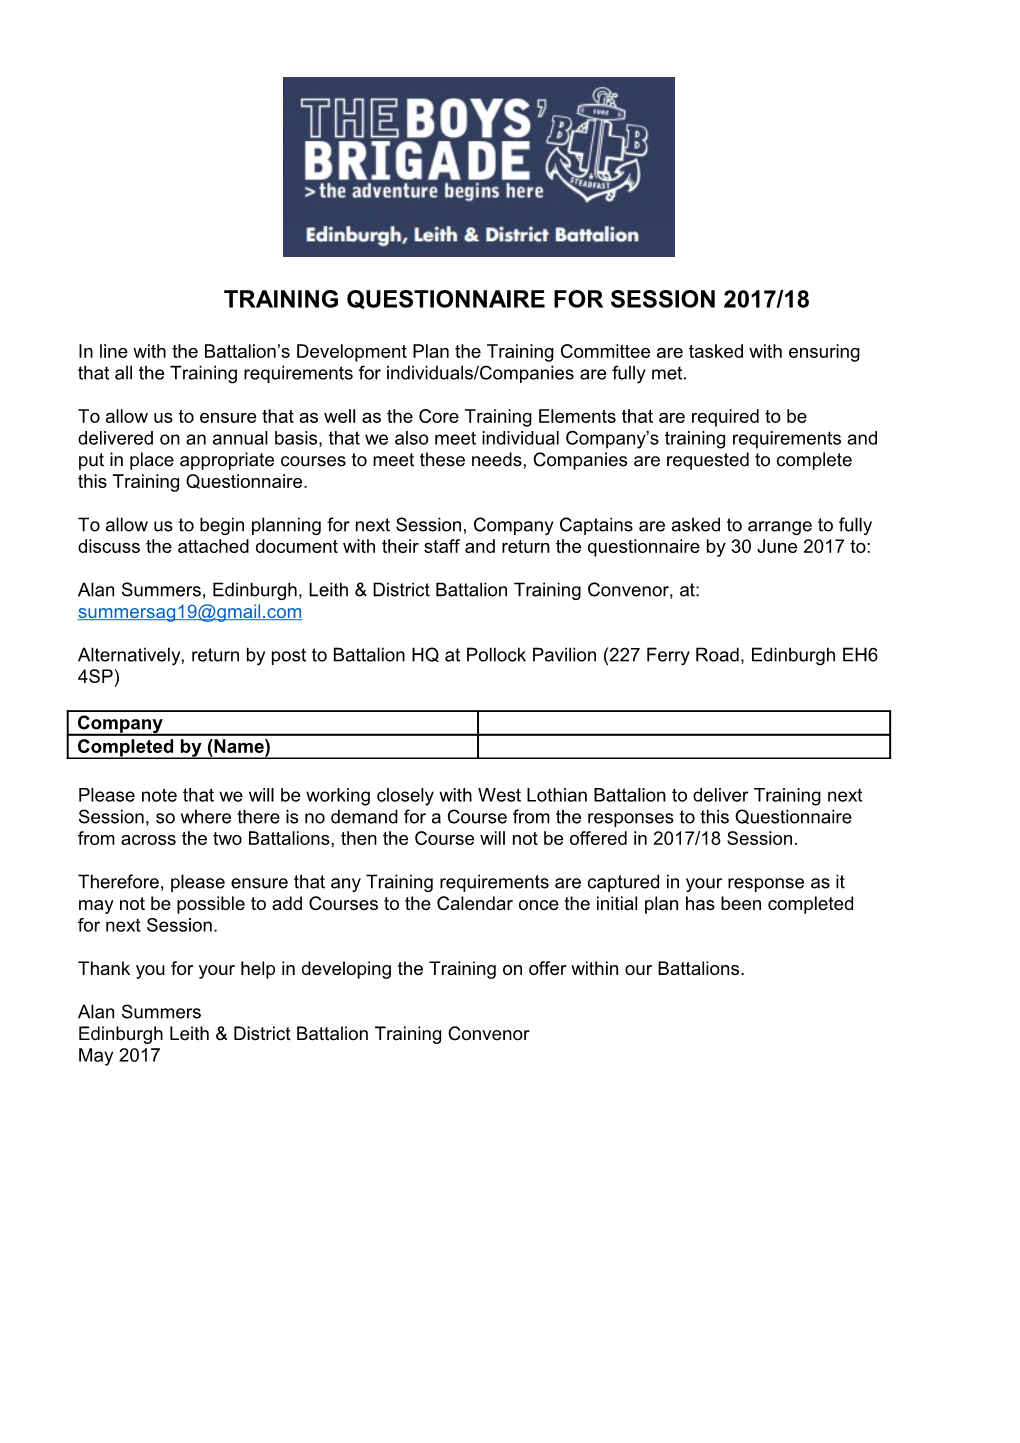 Training Questionnaire for Session 2017/18